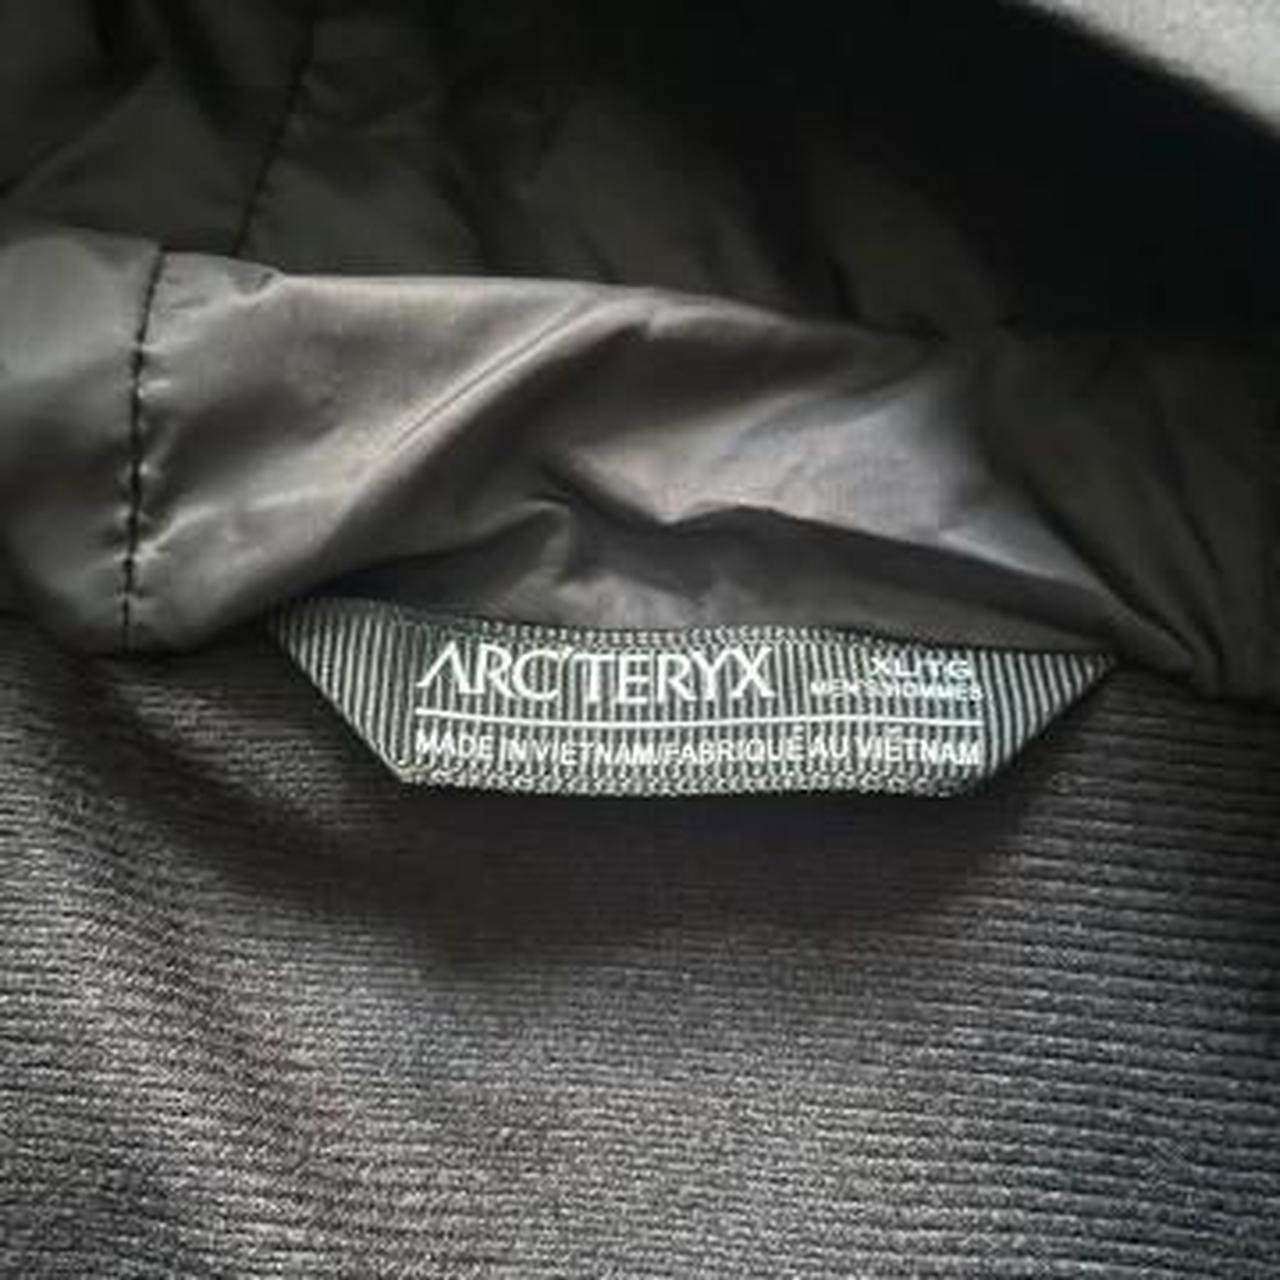 arcteryx gore tex jacket with tags absoulute steal... - Depop